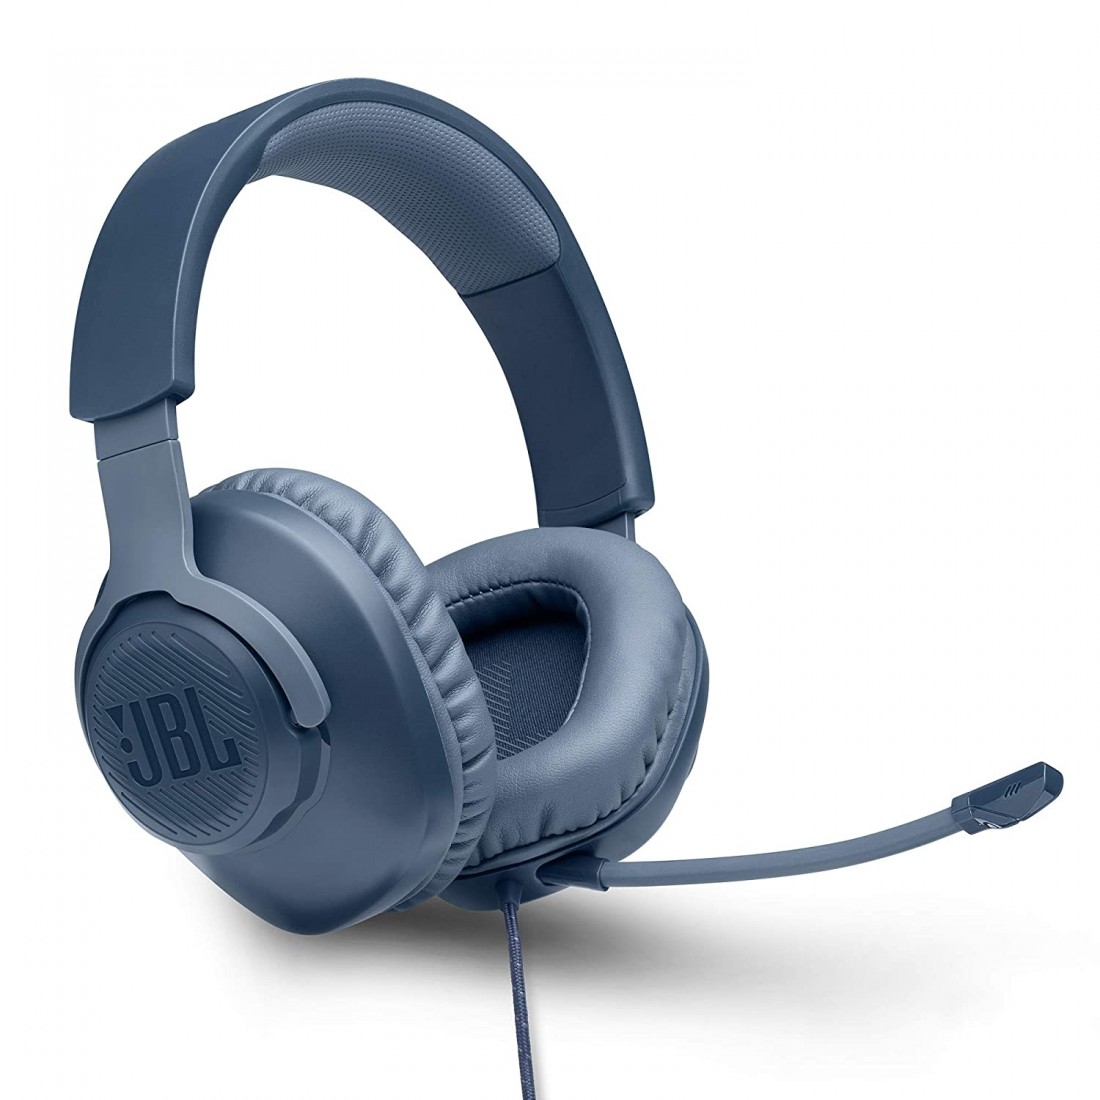 Buy JBL Quantum 100 Wired OverEar Gaming Headset with Detachable Mic